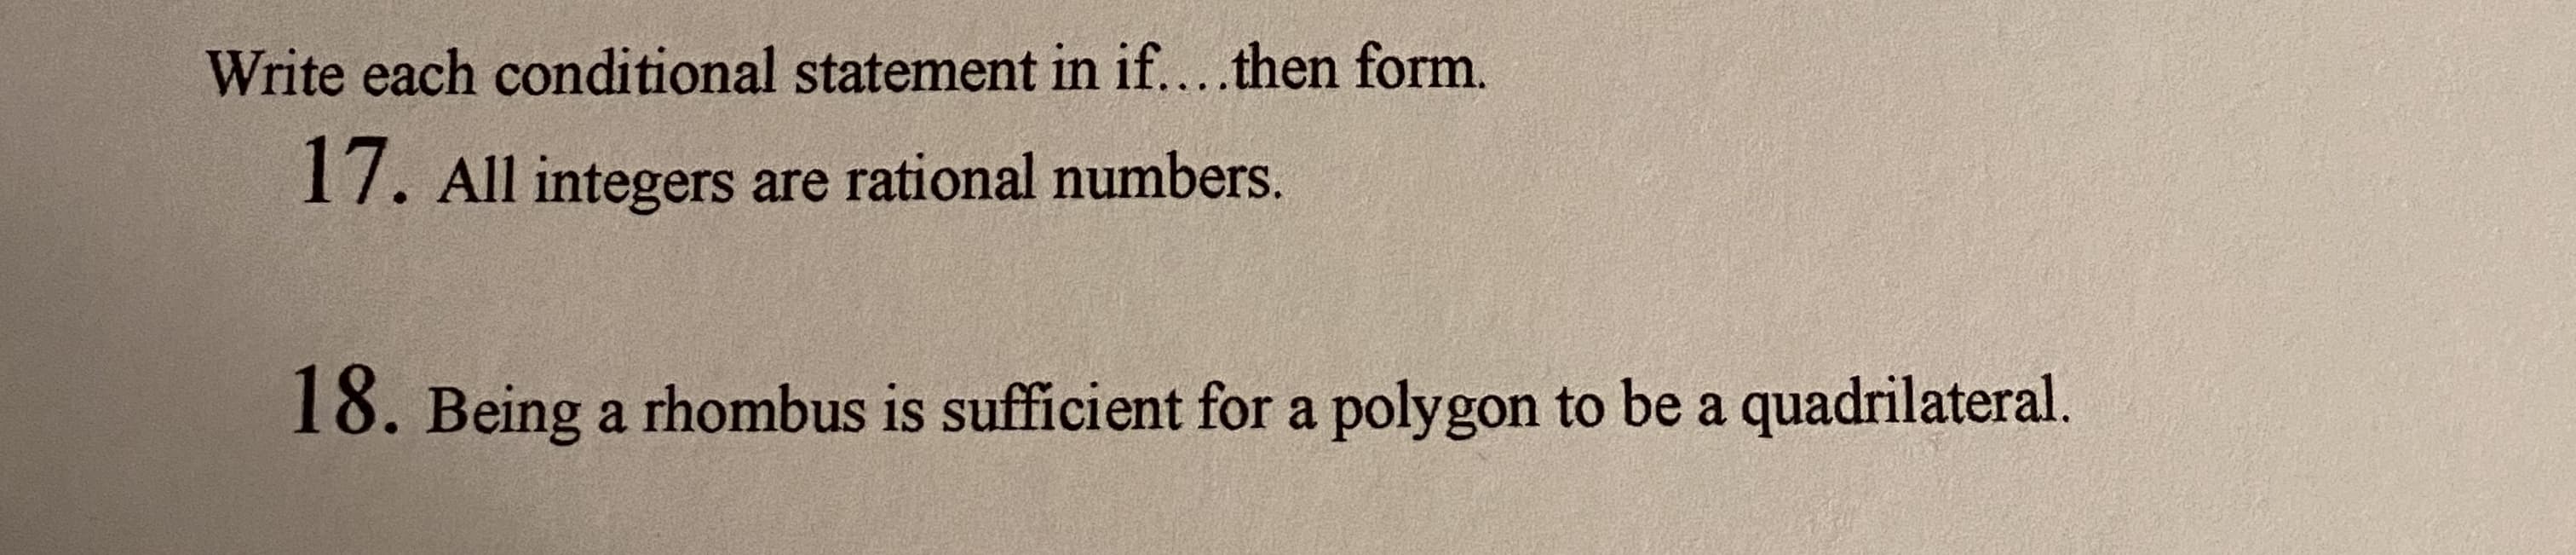 Write each conditional statement in if....then form.
17. All integers are rational numbers.
18. Being a rhombus is sufficient for a polygon to be a quadrilateral.
